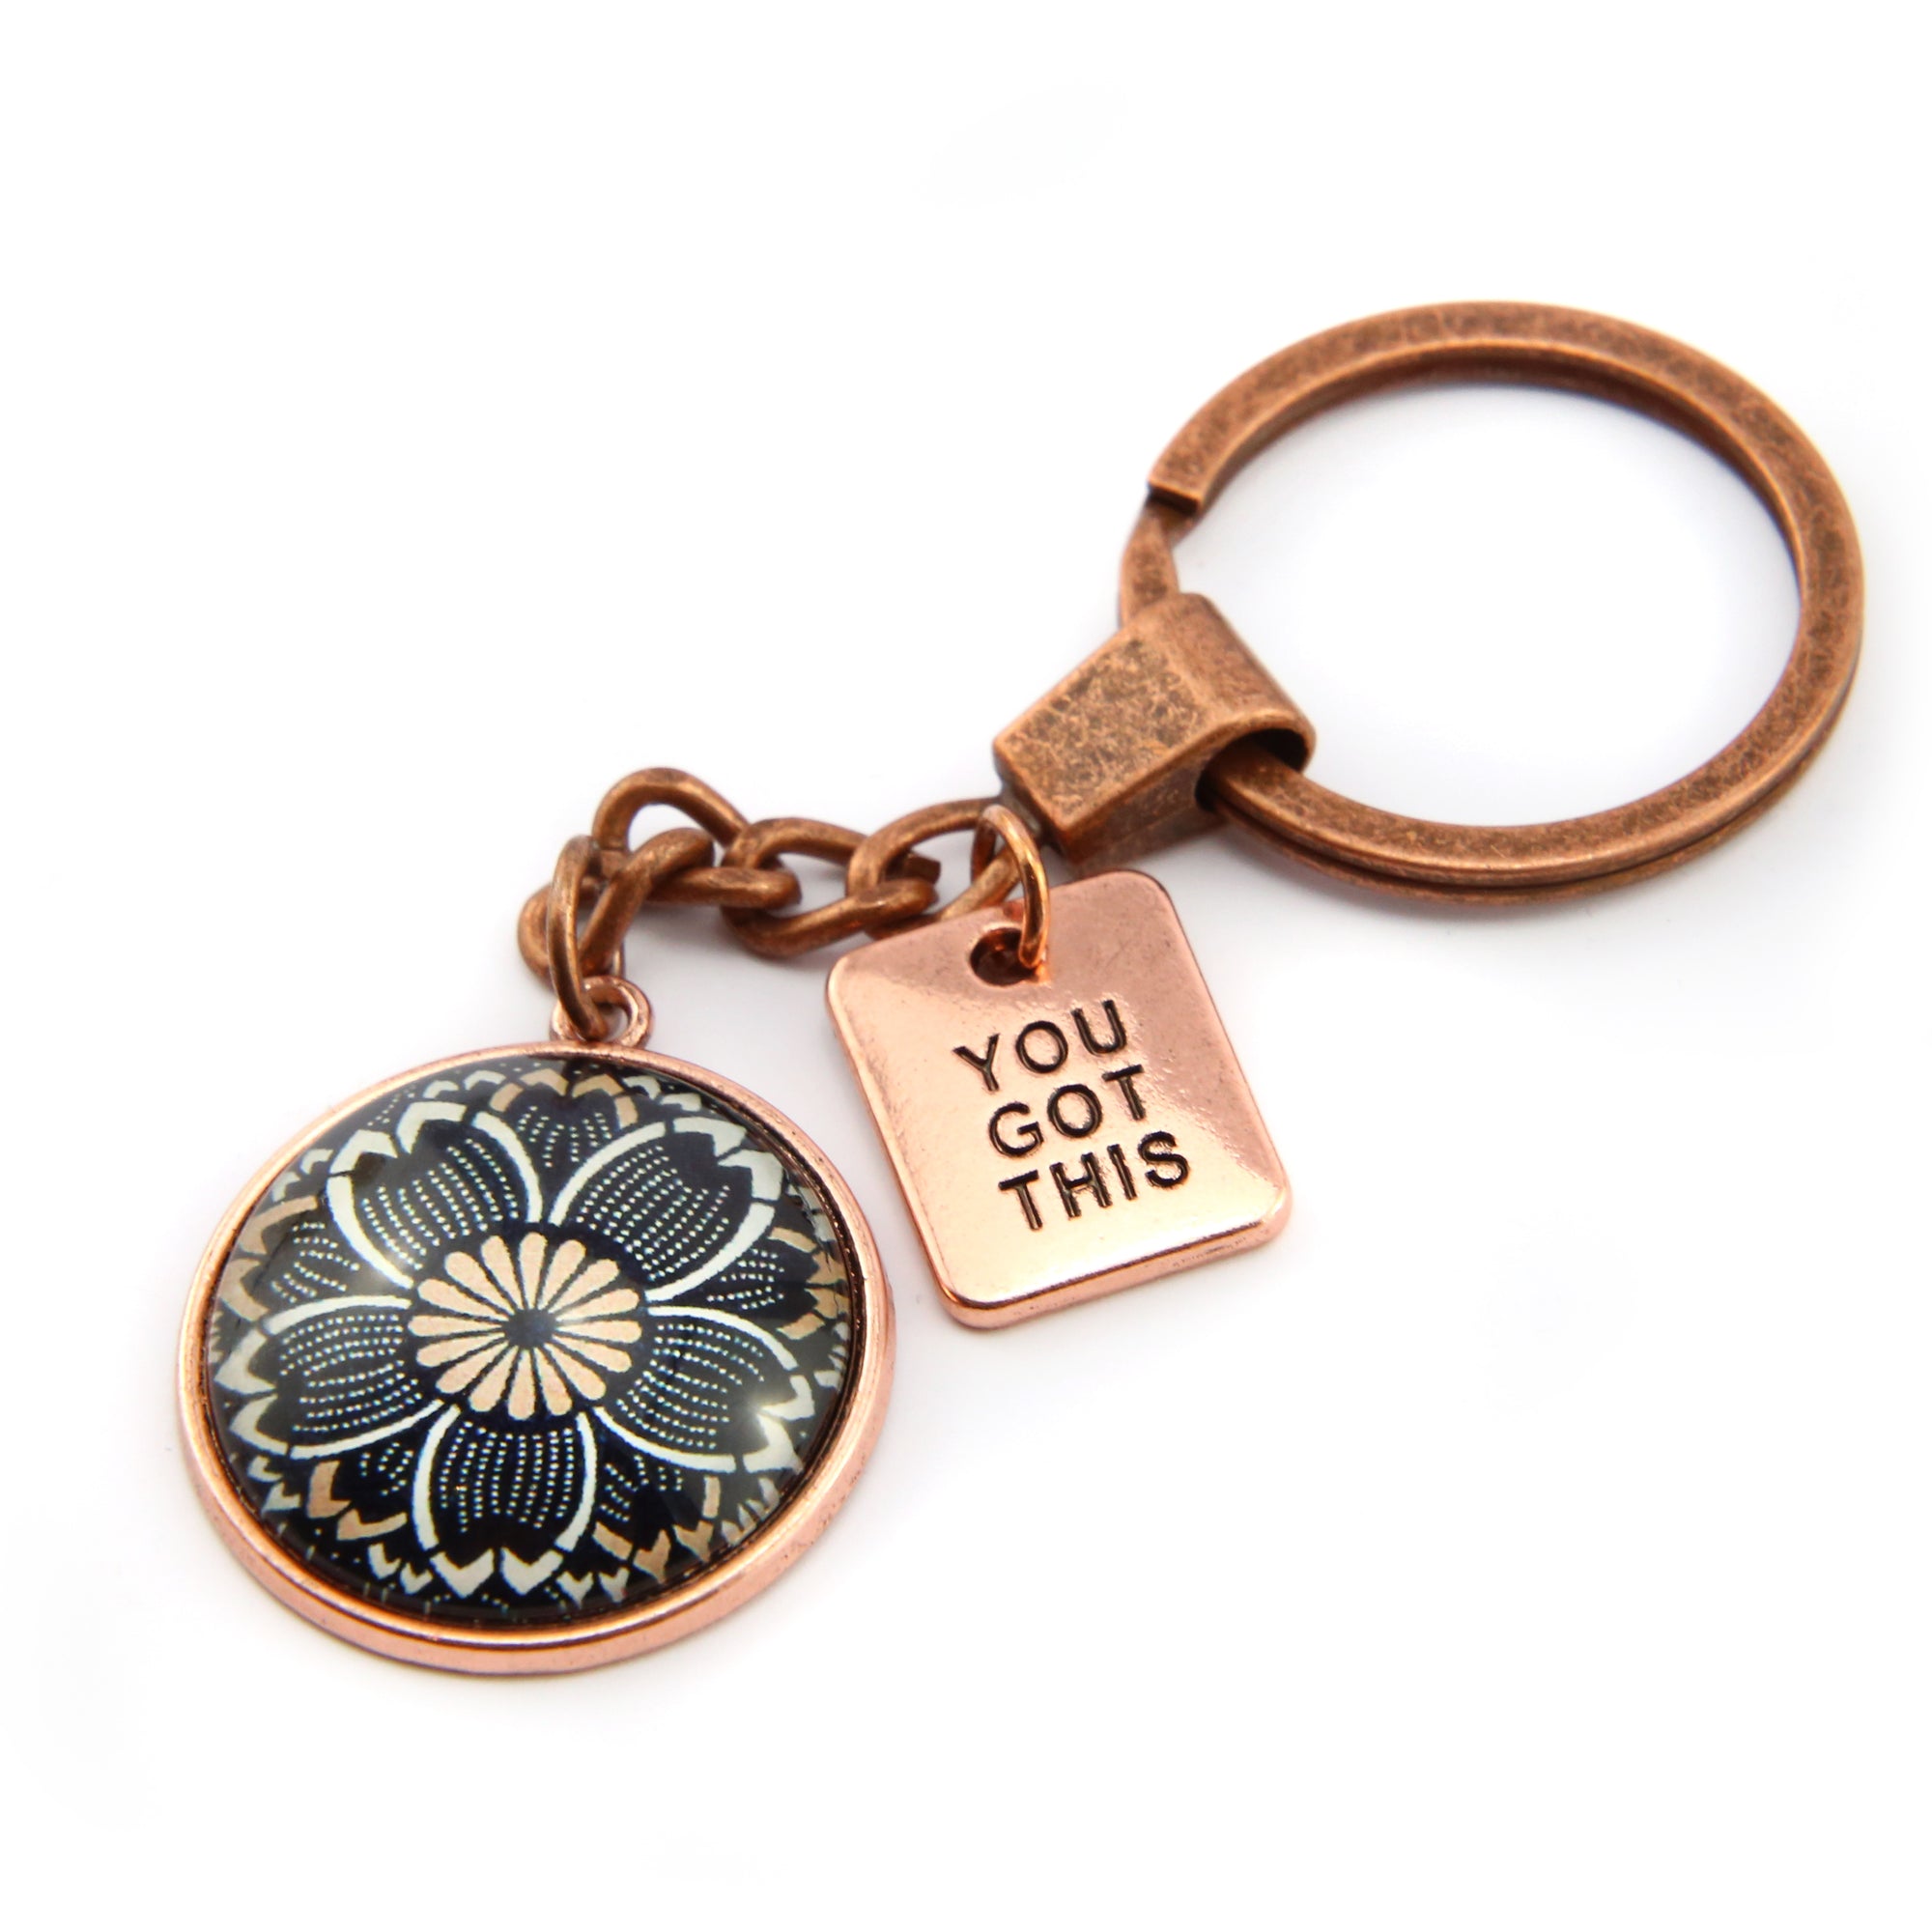 Vintage Rose Gold Keyring with 'YOU GOT THIS' charm - Buttercup (10154)